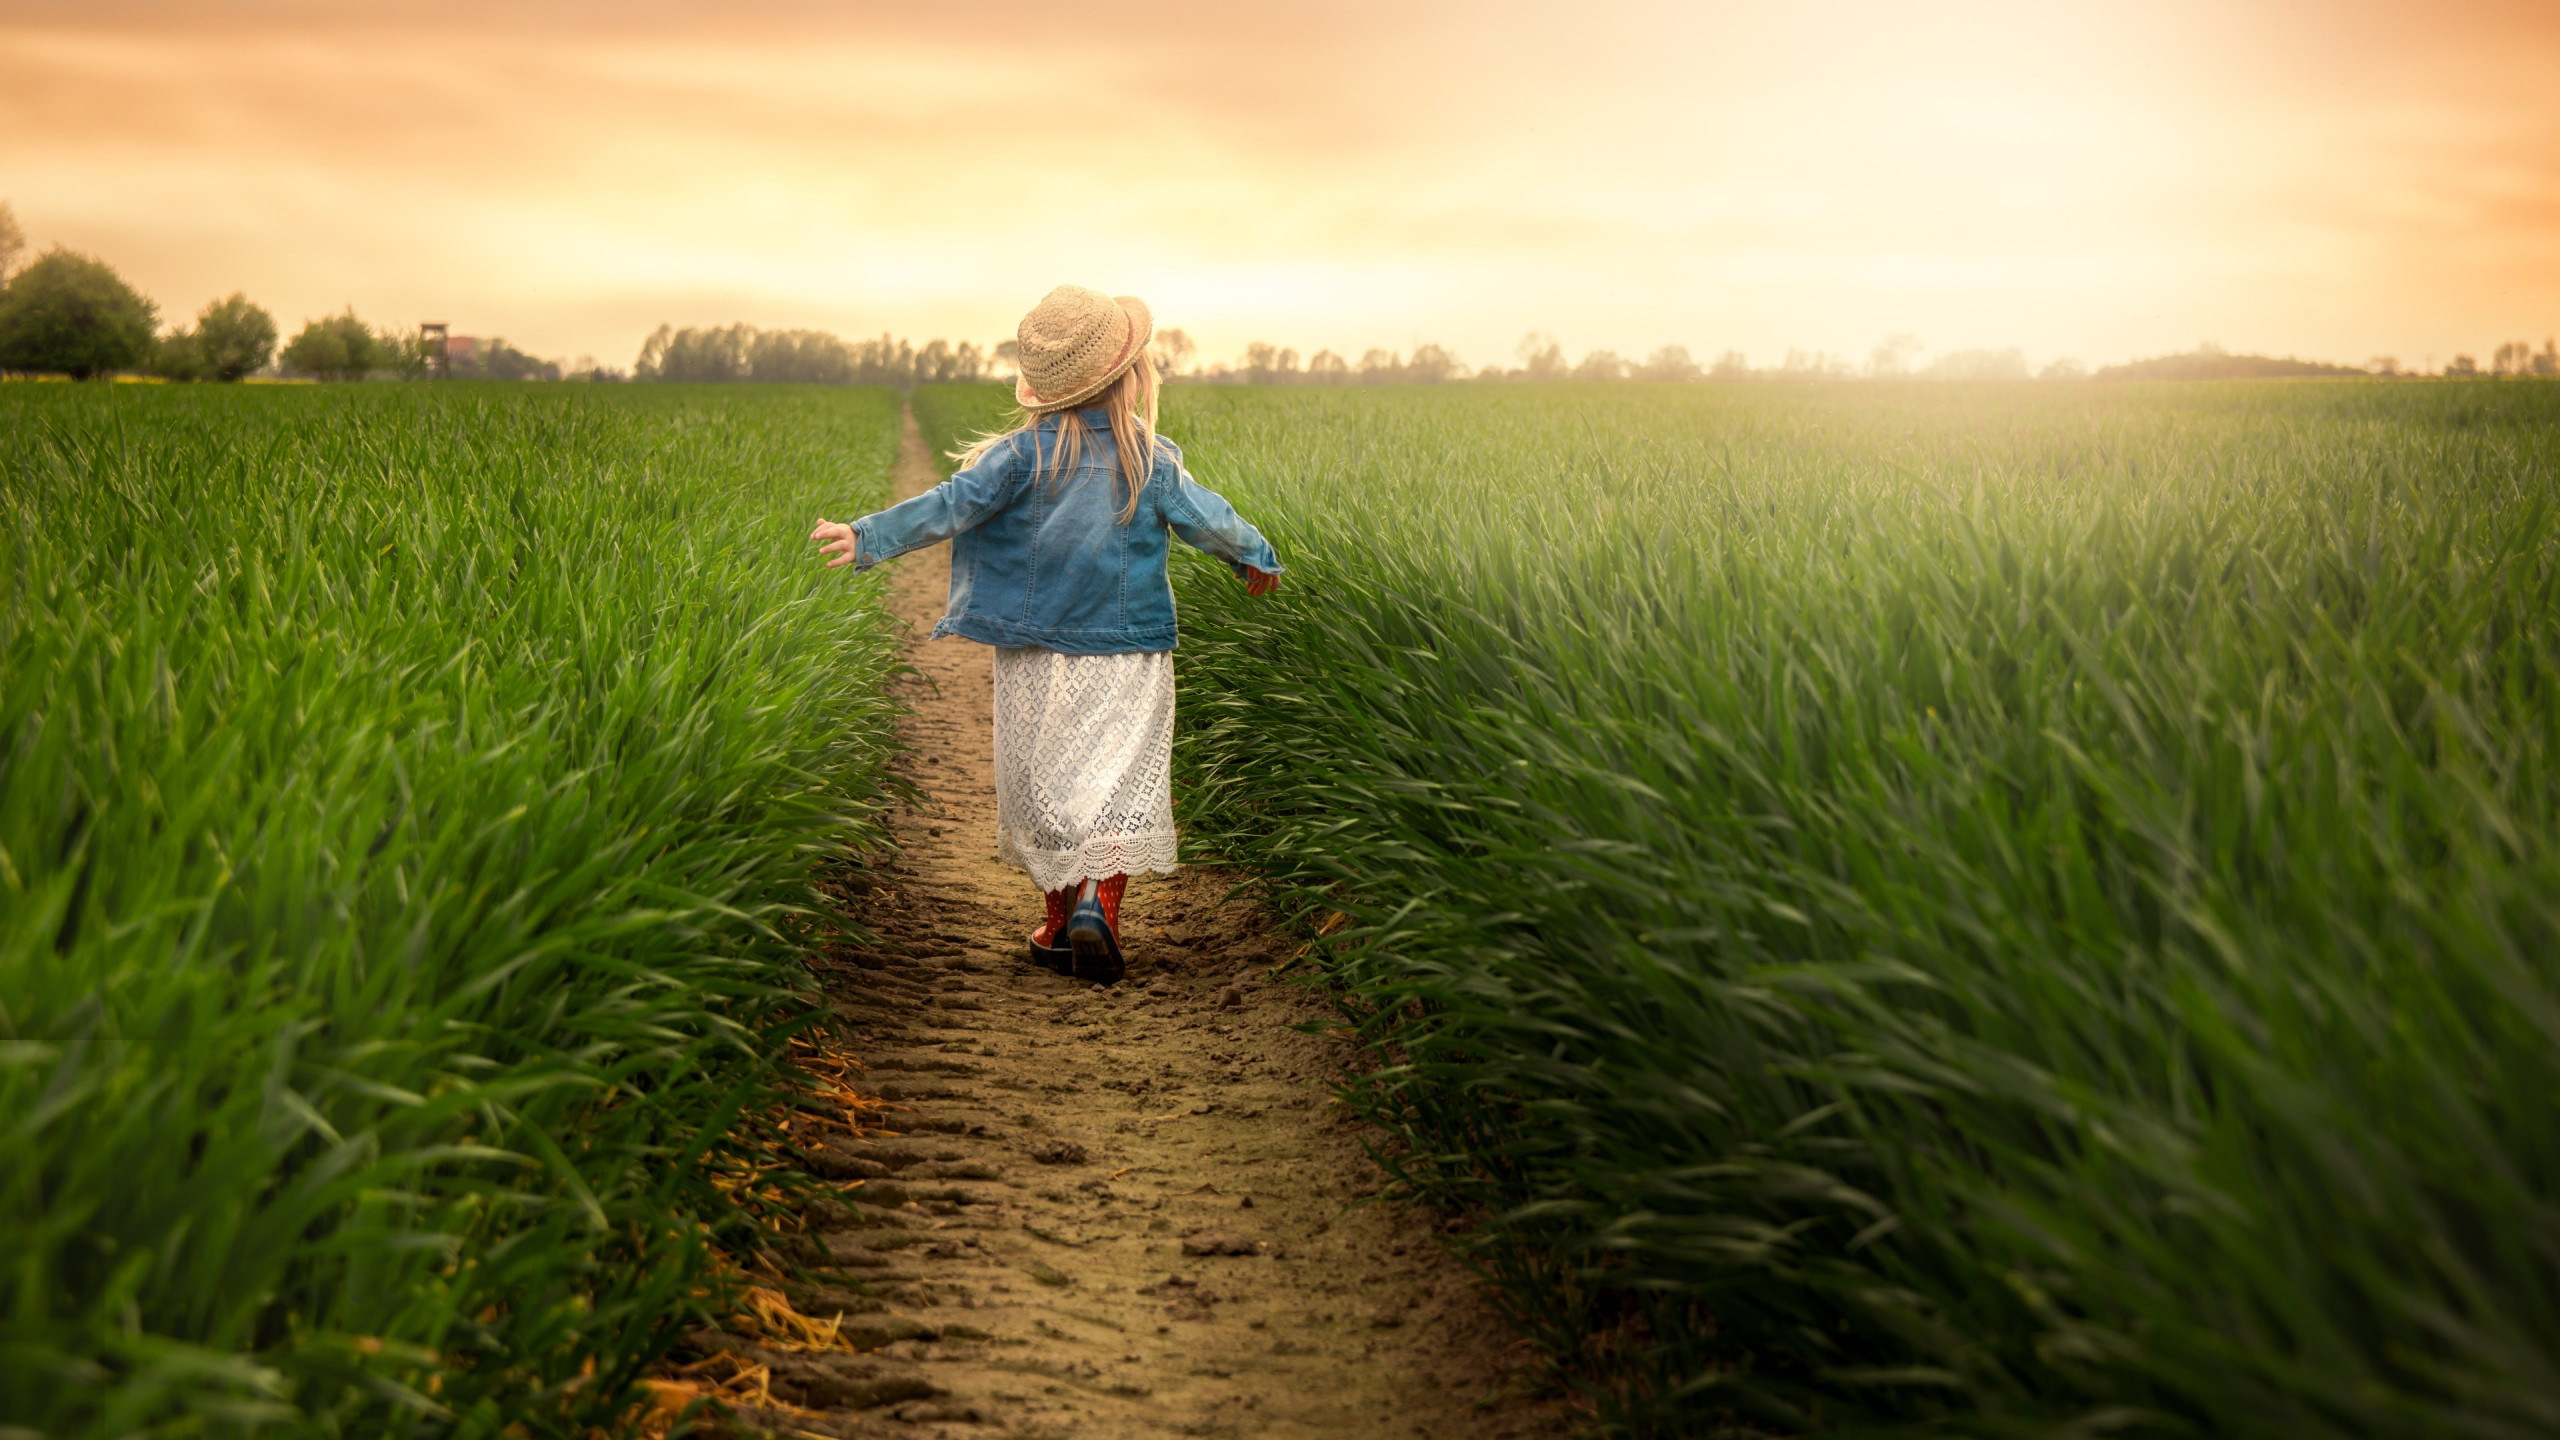 Child in the green field at sunset wallpaper 2560x1440